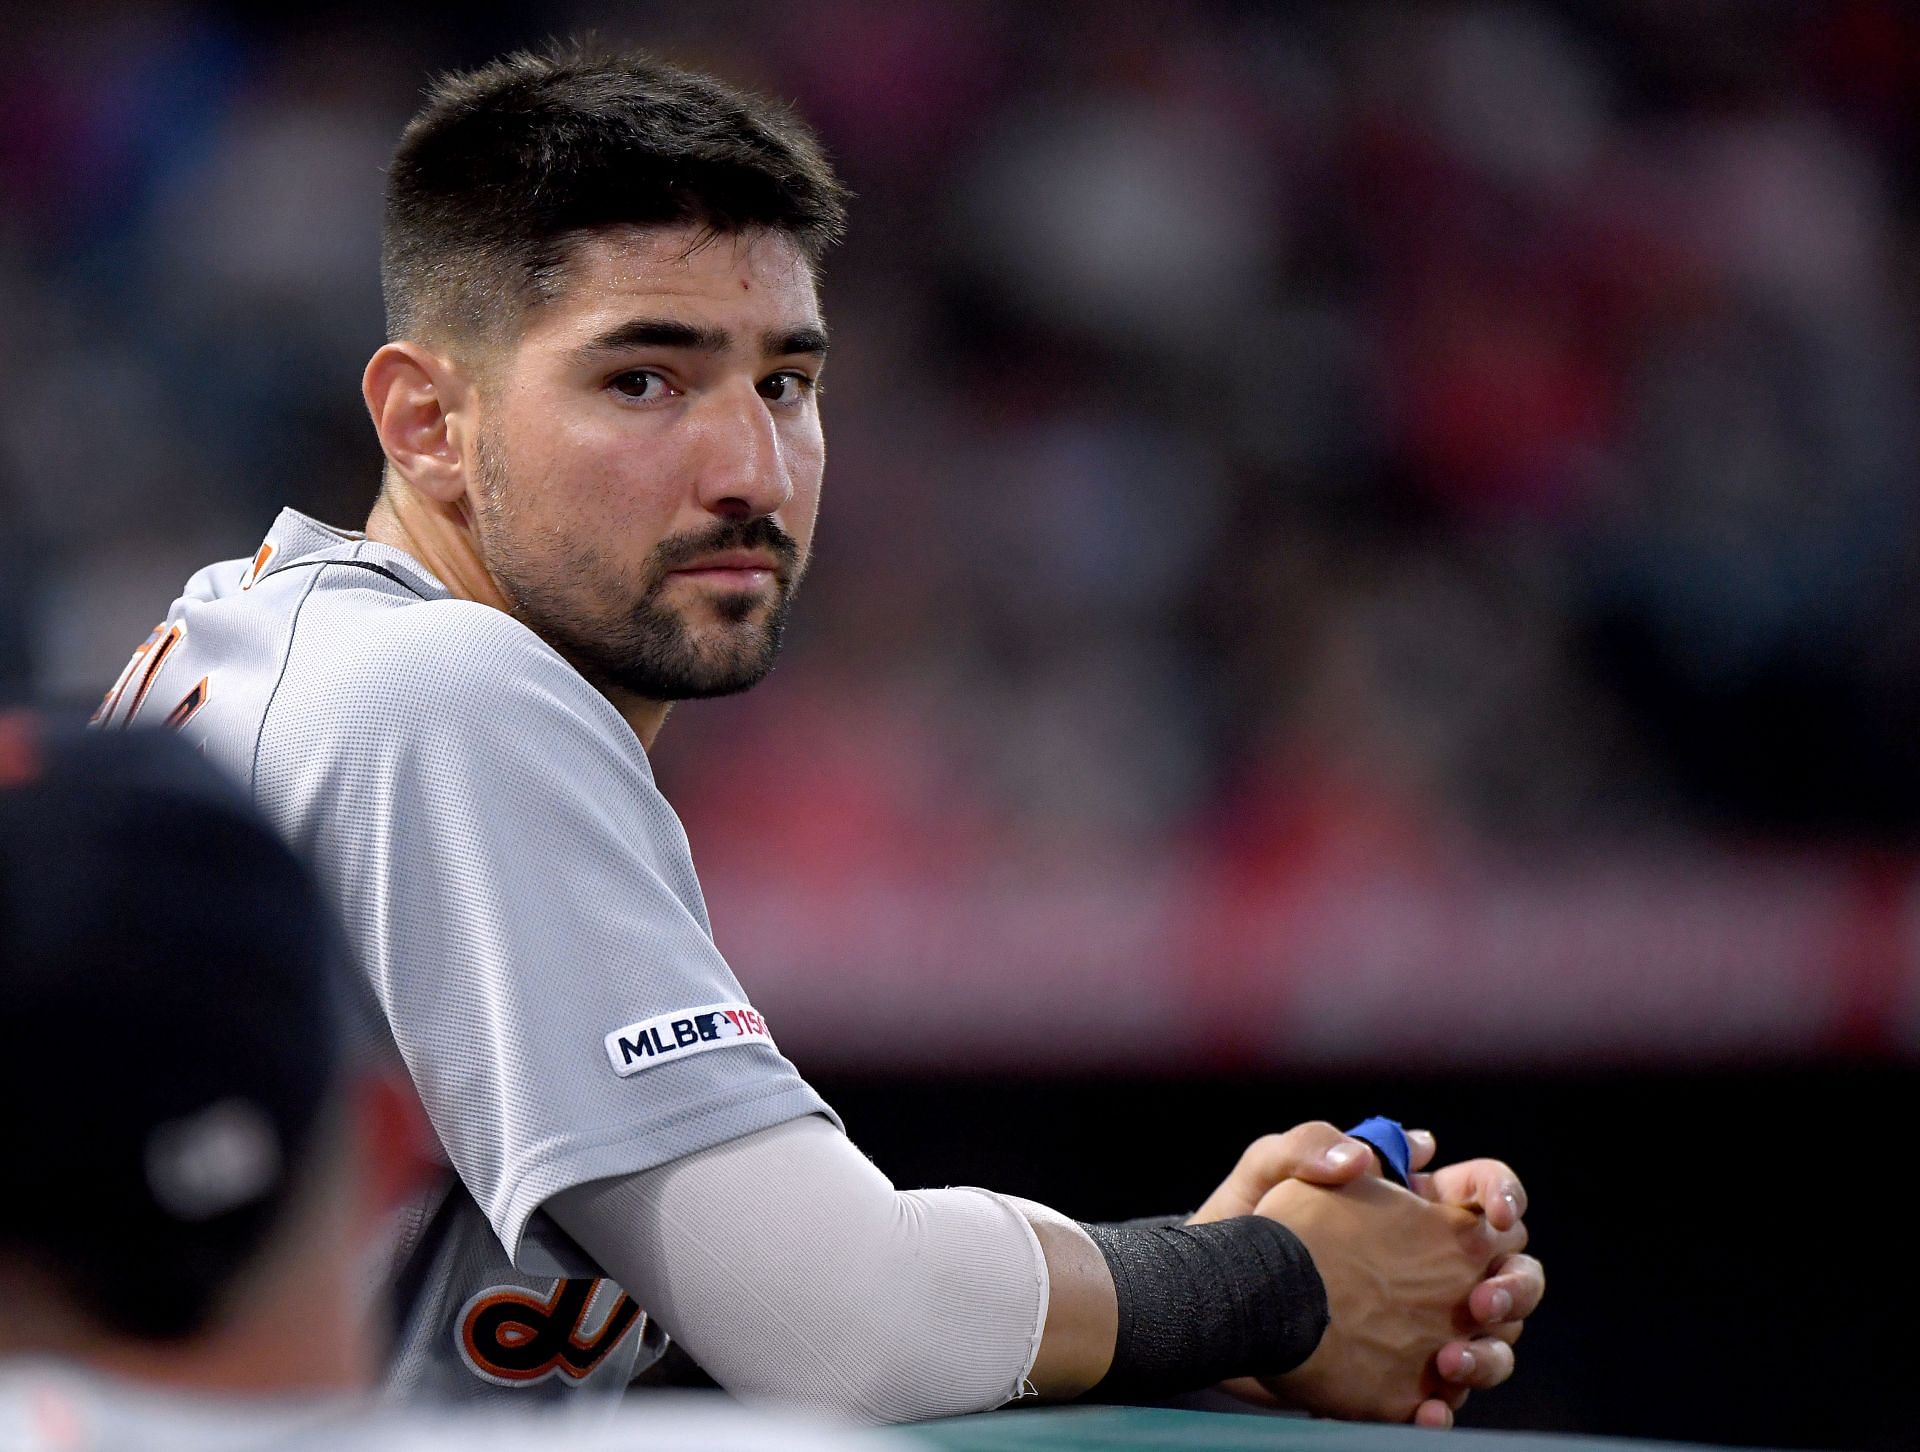 Tigers' Castellanos has matured, physically and mentally